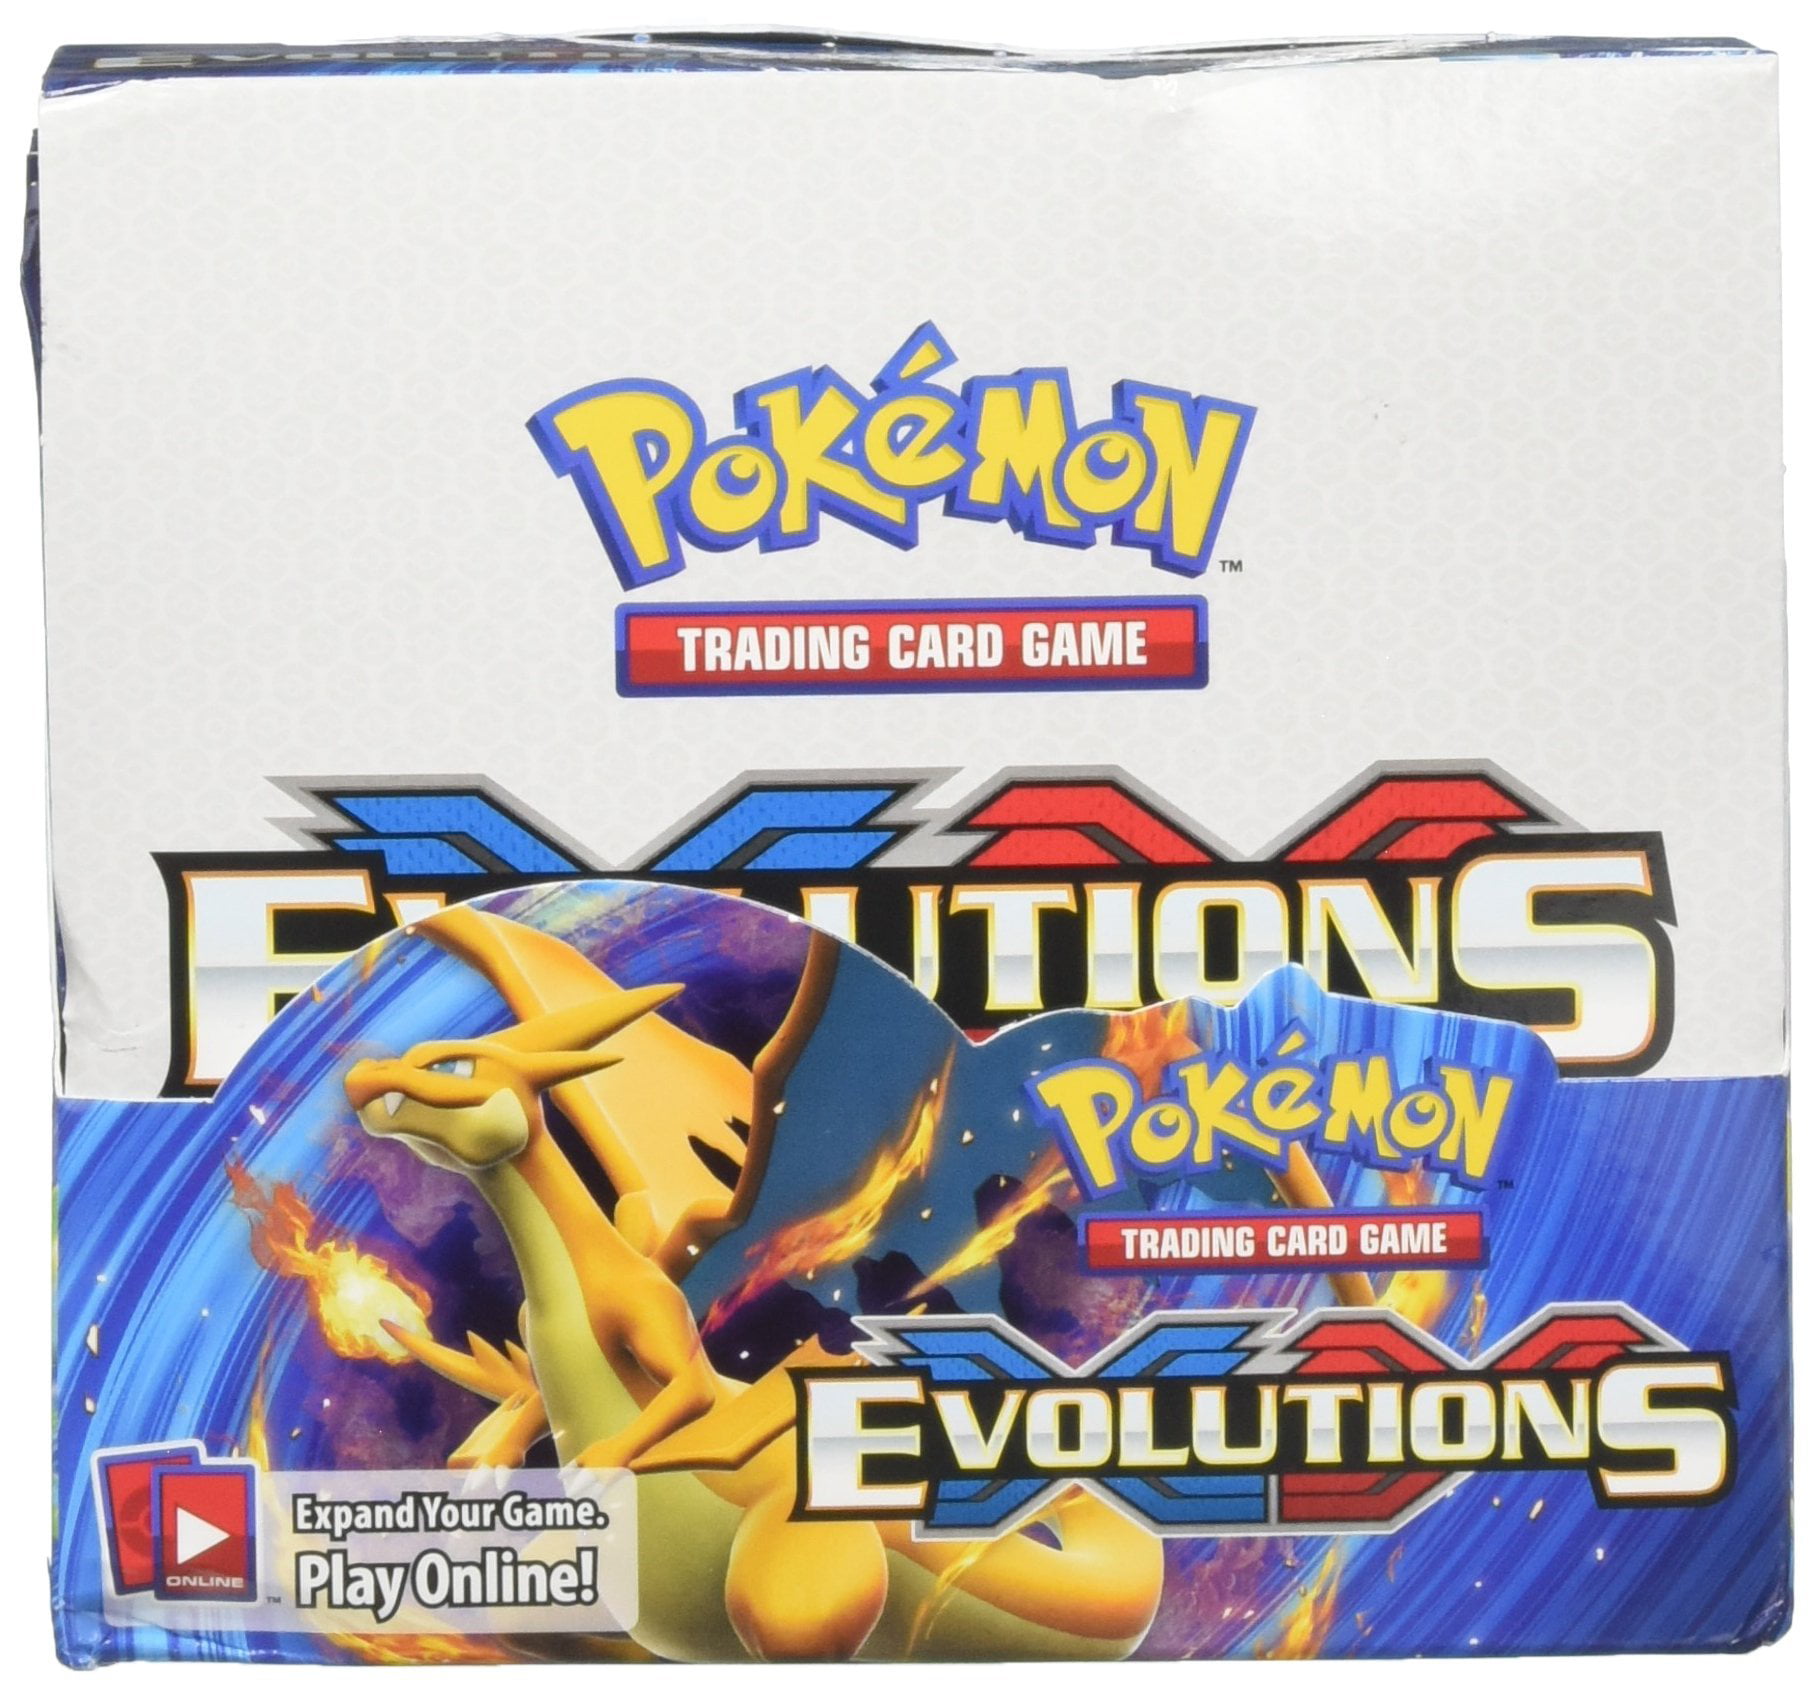 XY Evolutions Pokemon TCG New Factory Sealed Booster Pack